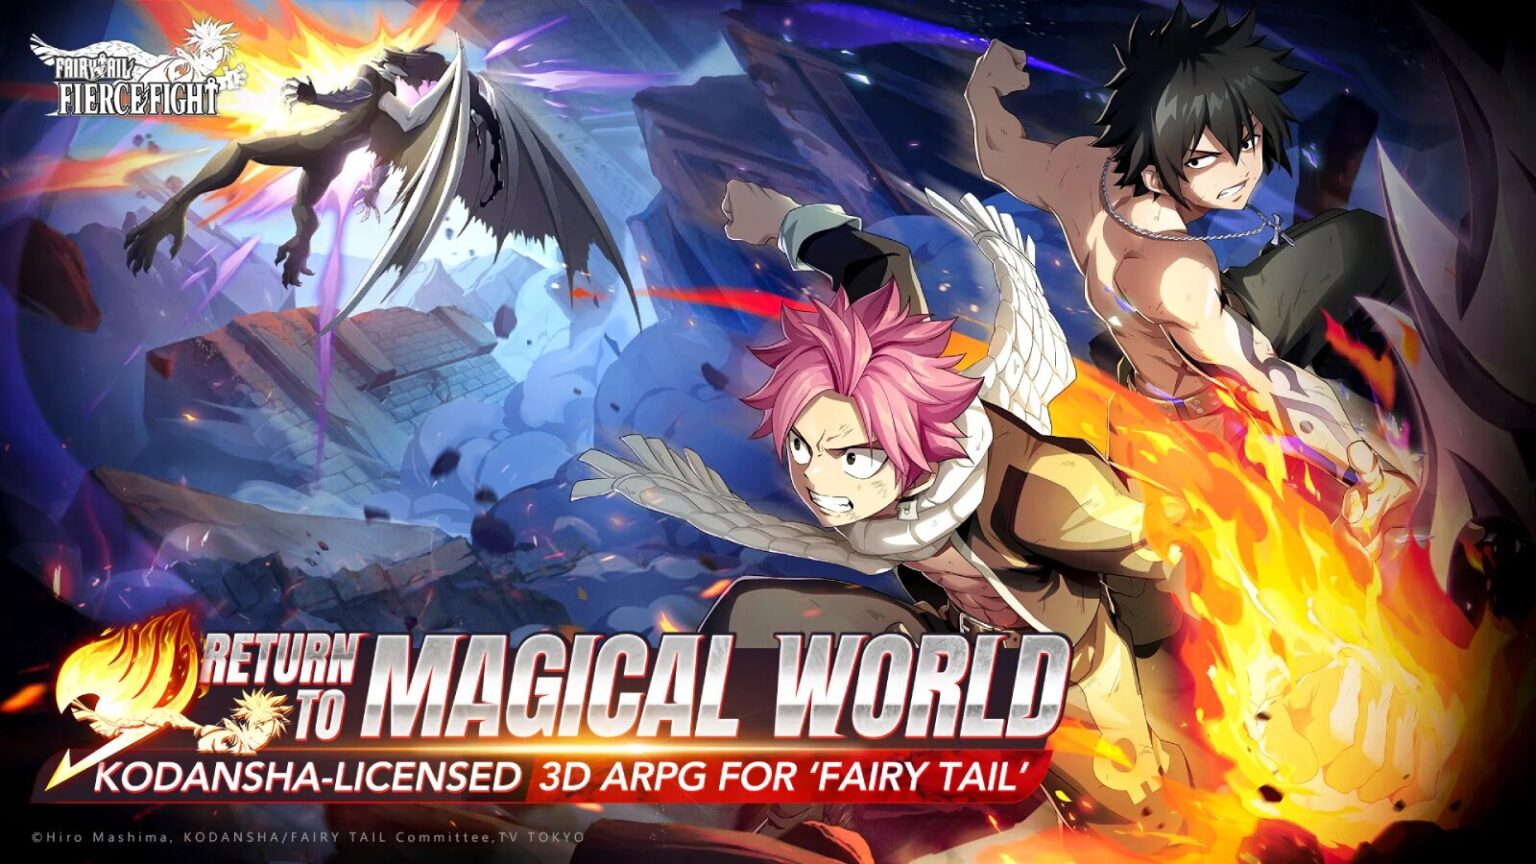 Fairy Tail Anime game promotion with fiery action and characters